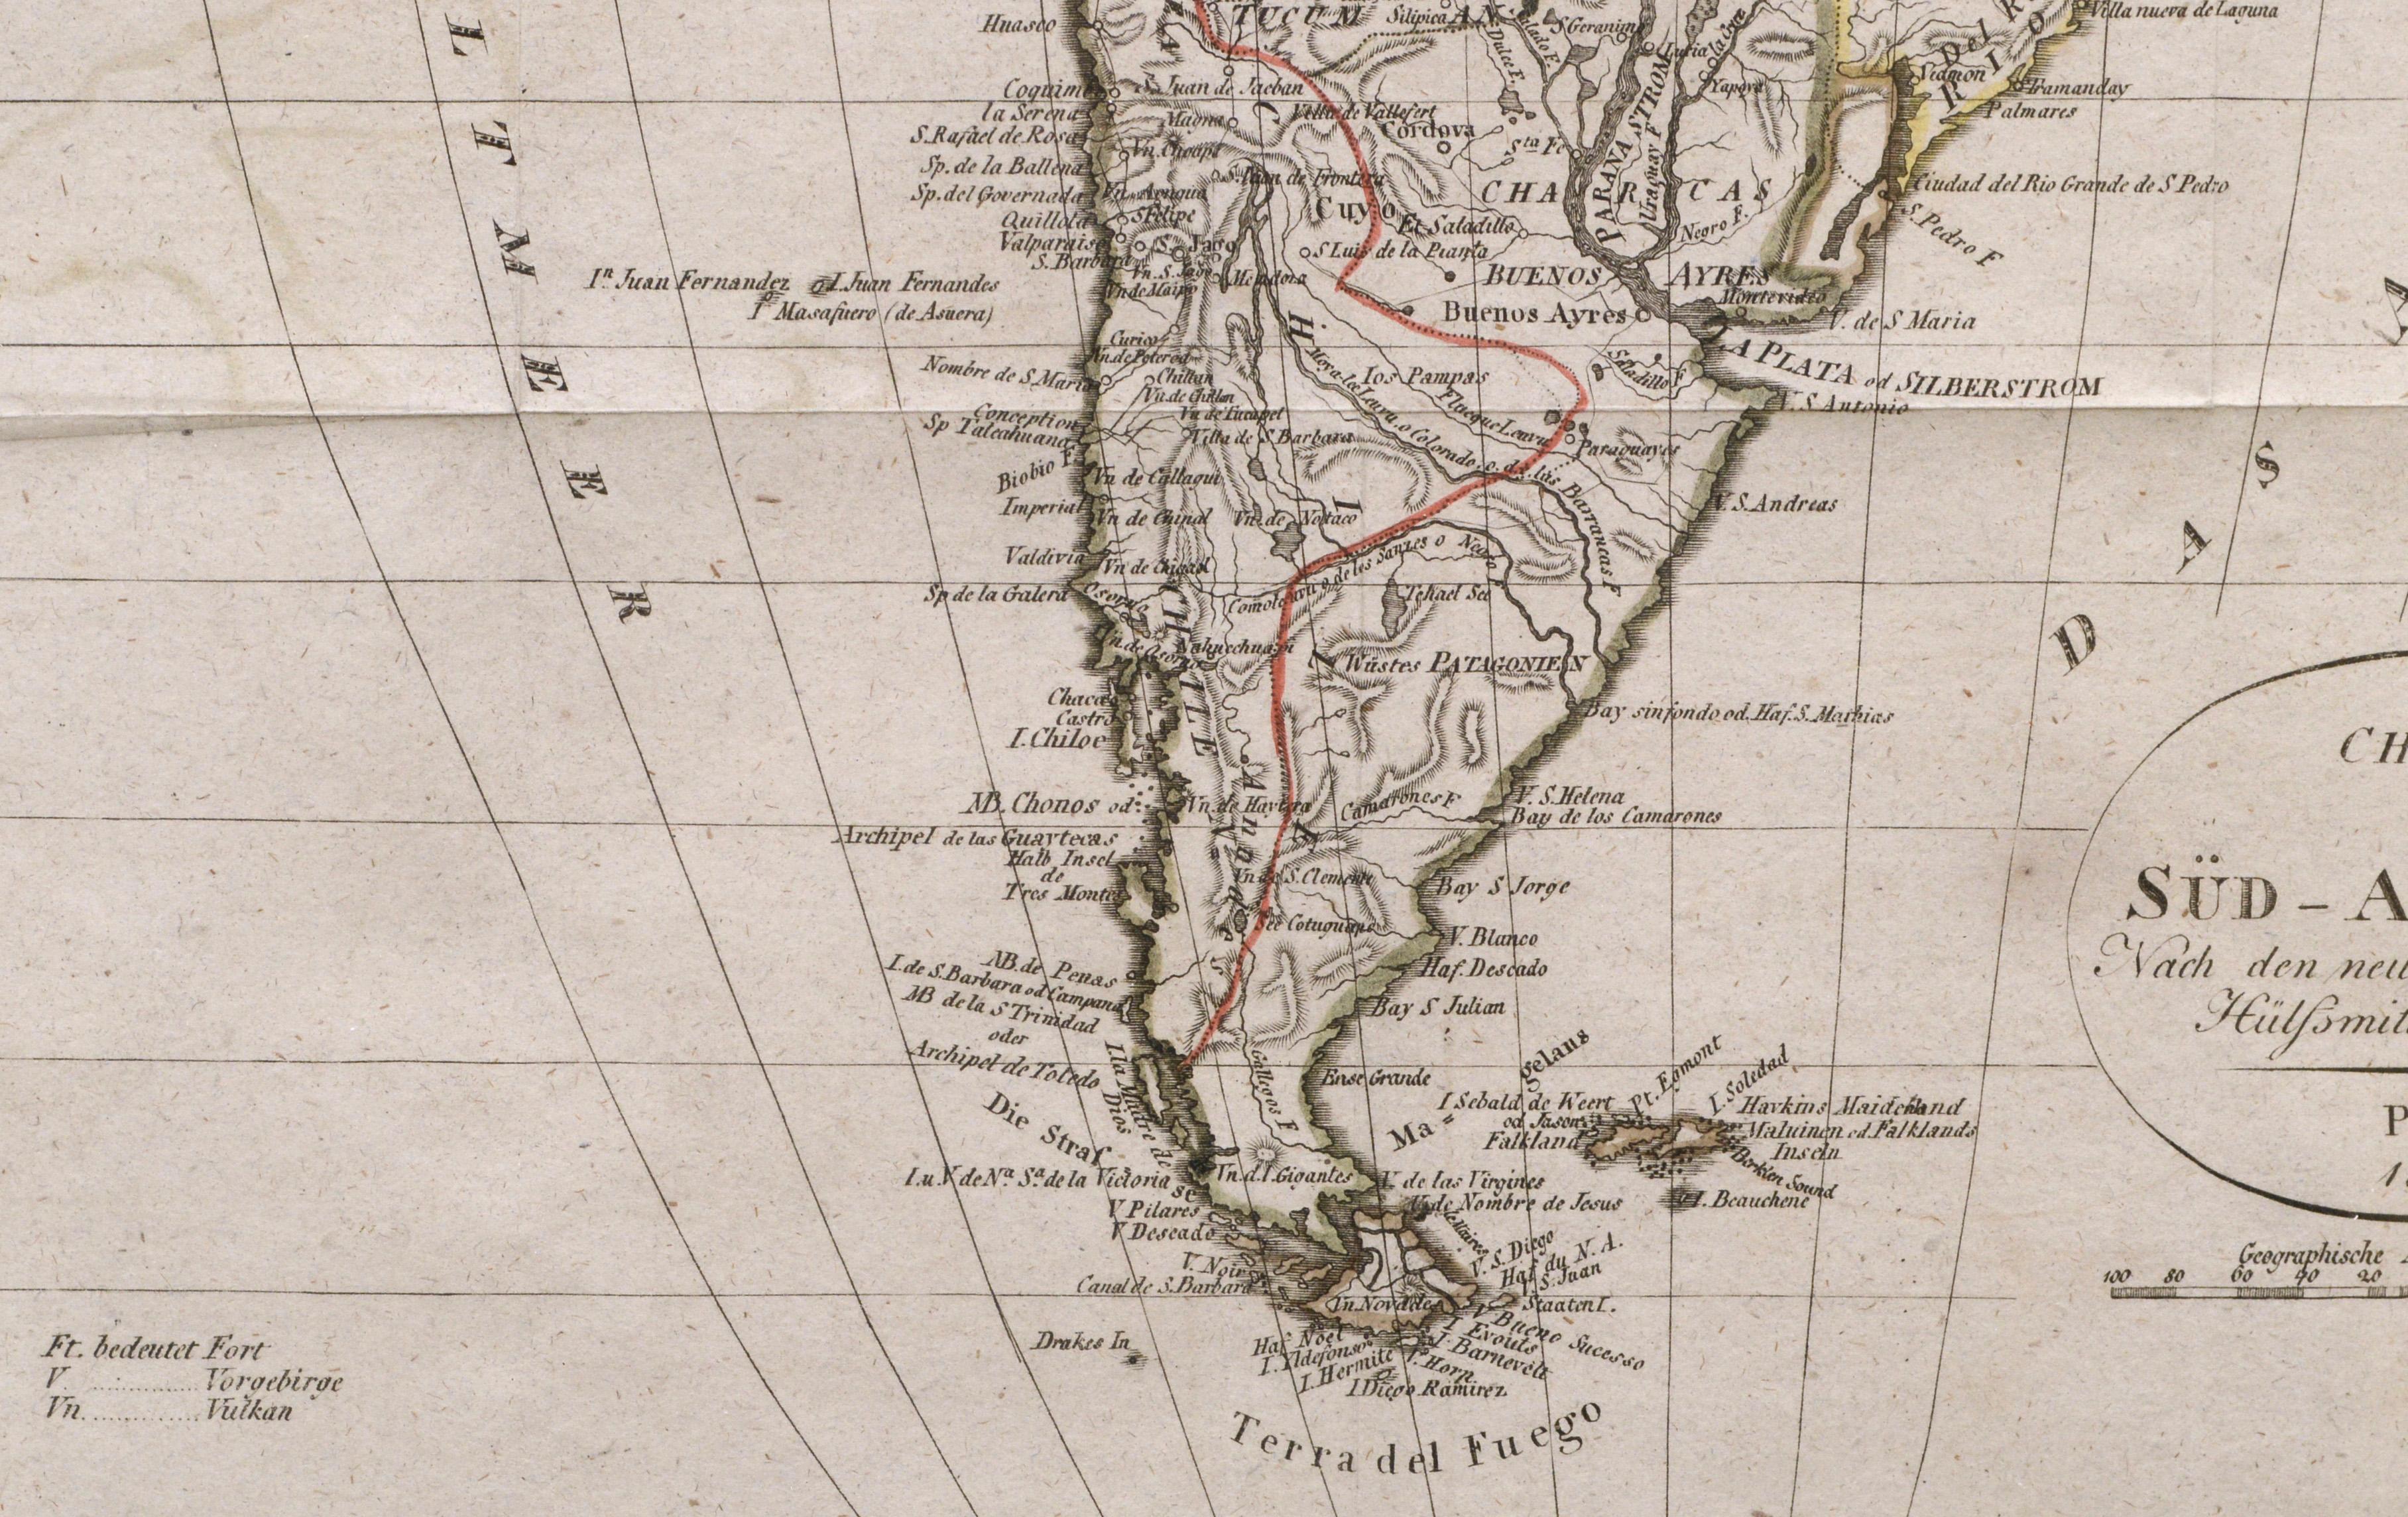 Charte von Sud-America (Map of South America) - Etching with Hand-Drawn Outlines - Other Art Style Print by Franz Pluth